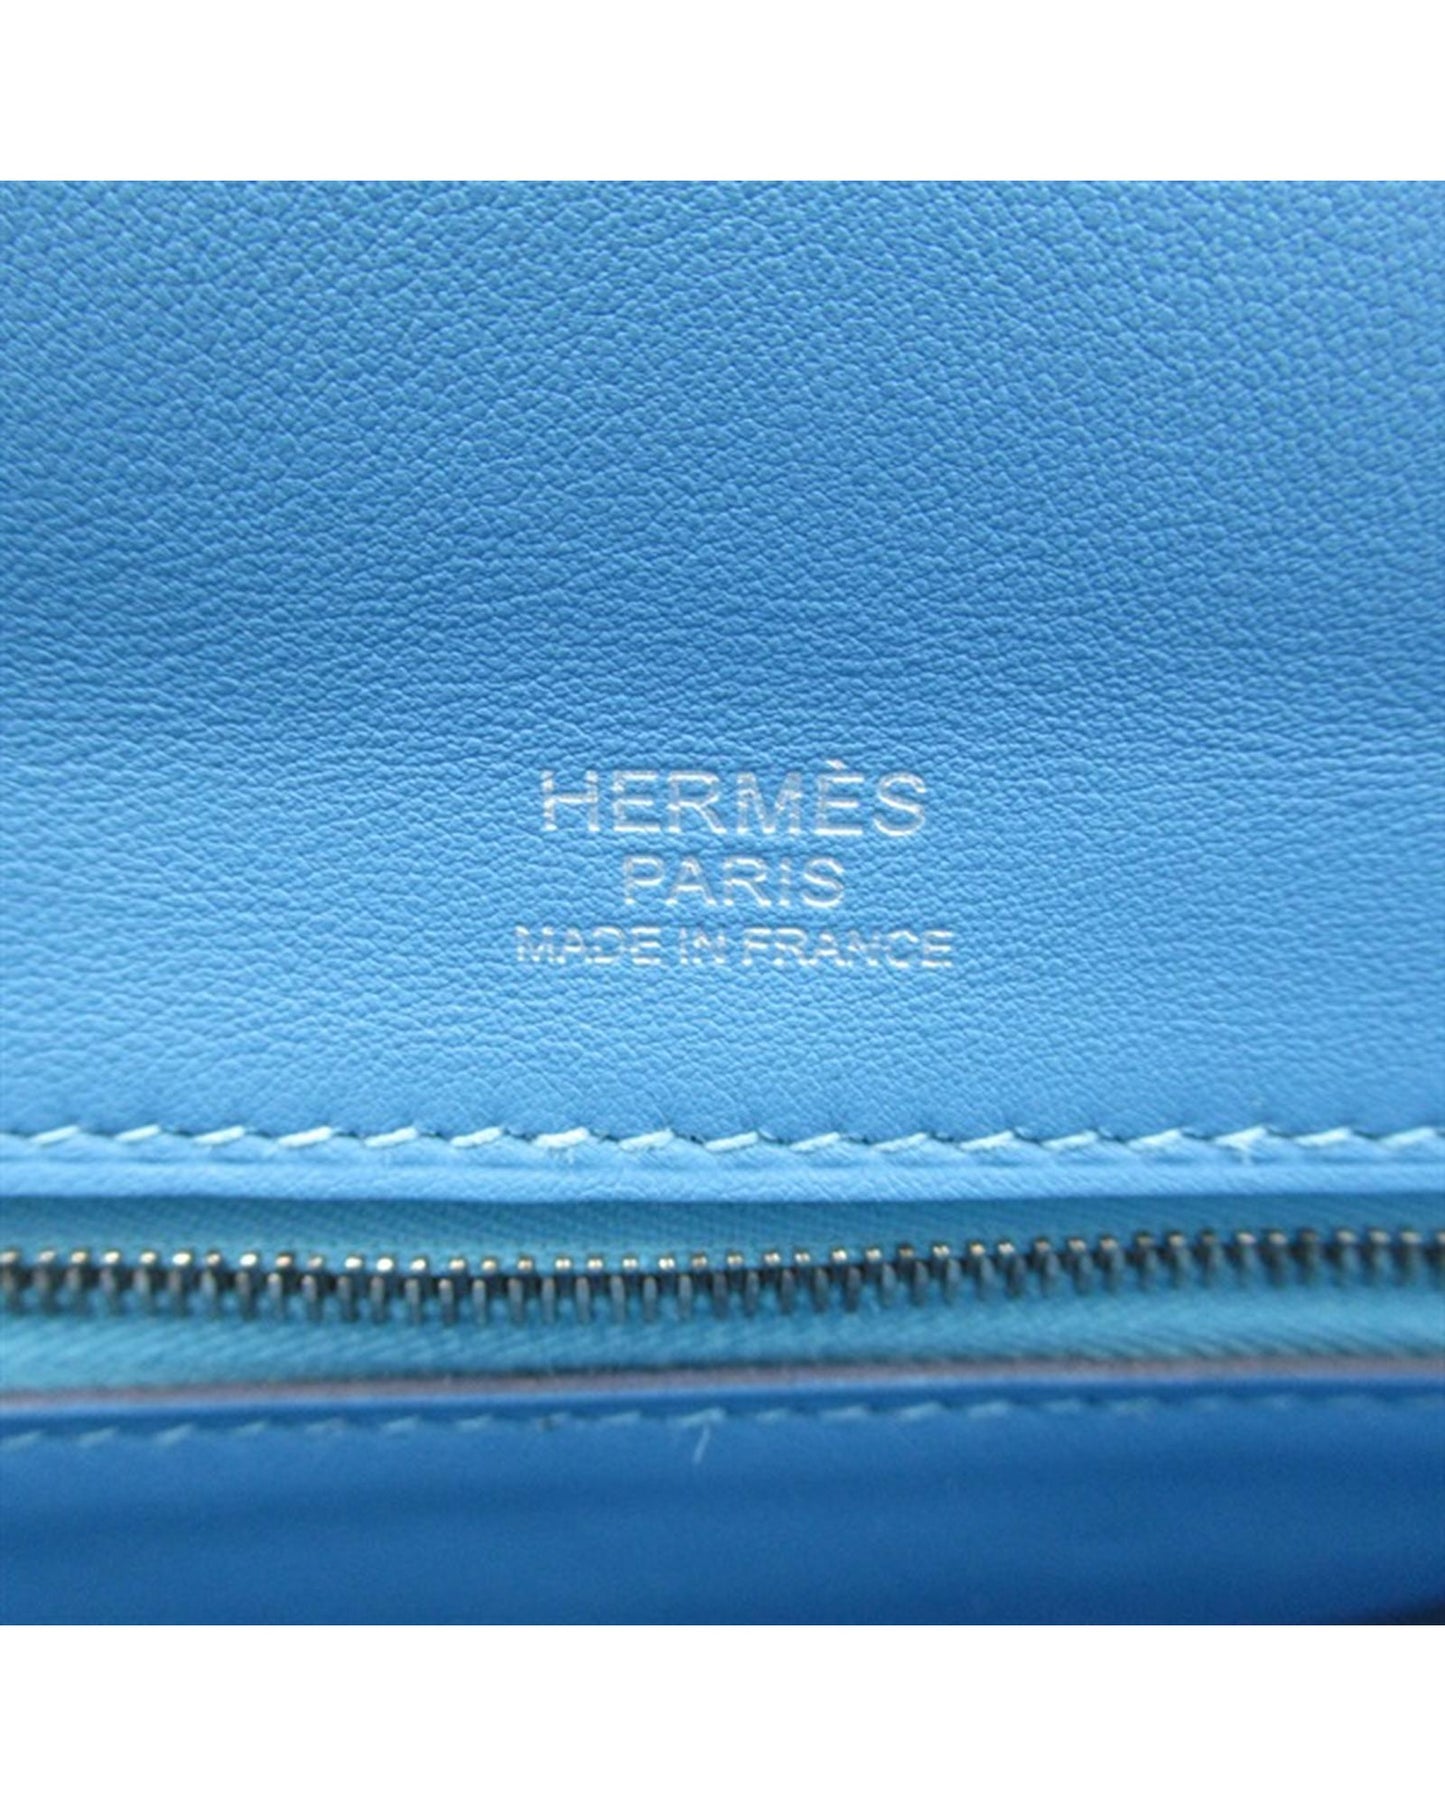 Hermes Women's Blue Togo Bag 24/24 - 29 in A Condition in Blue